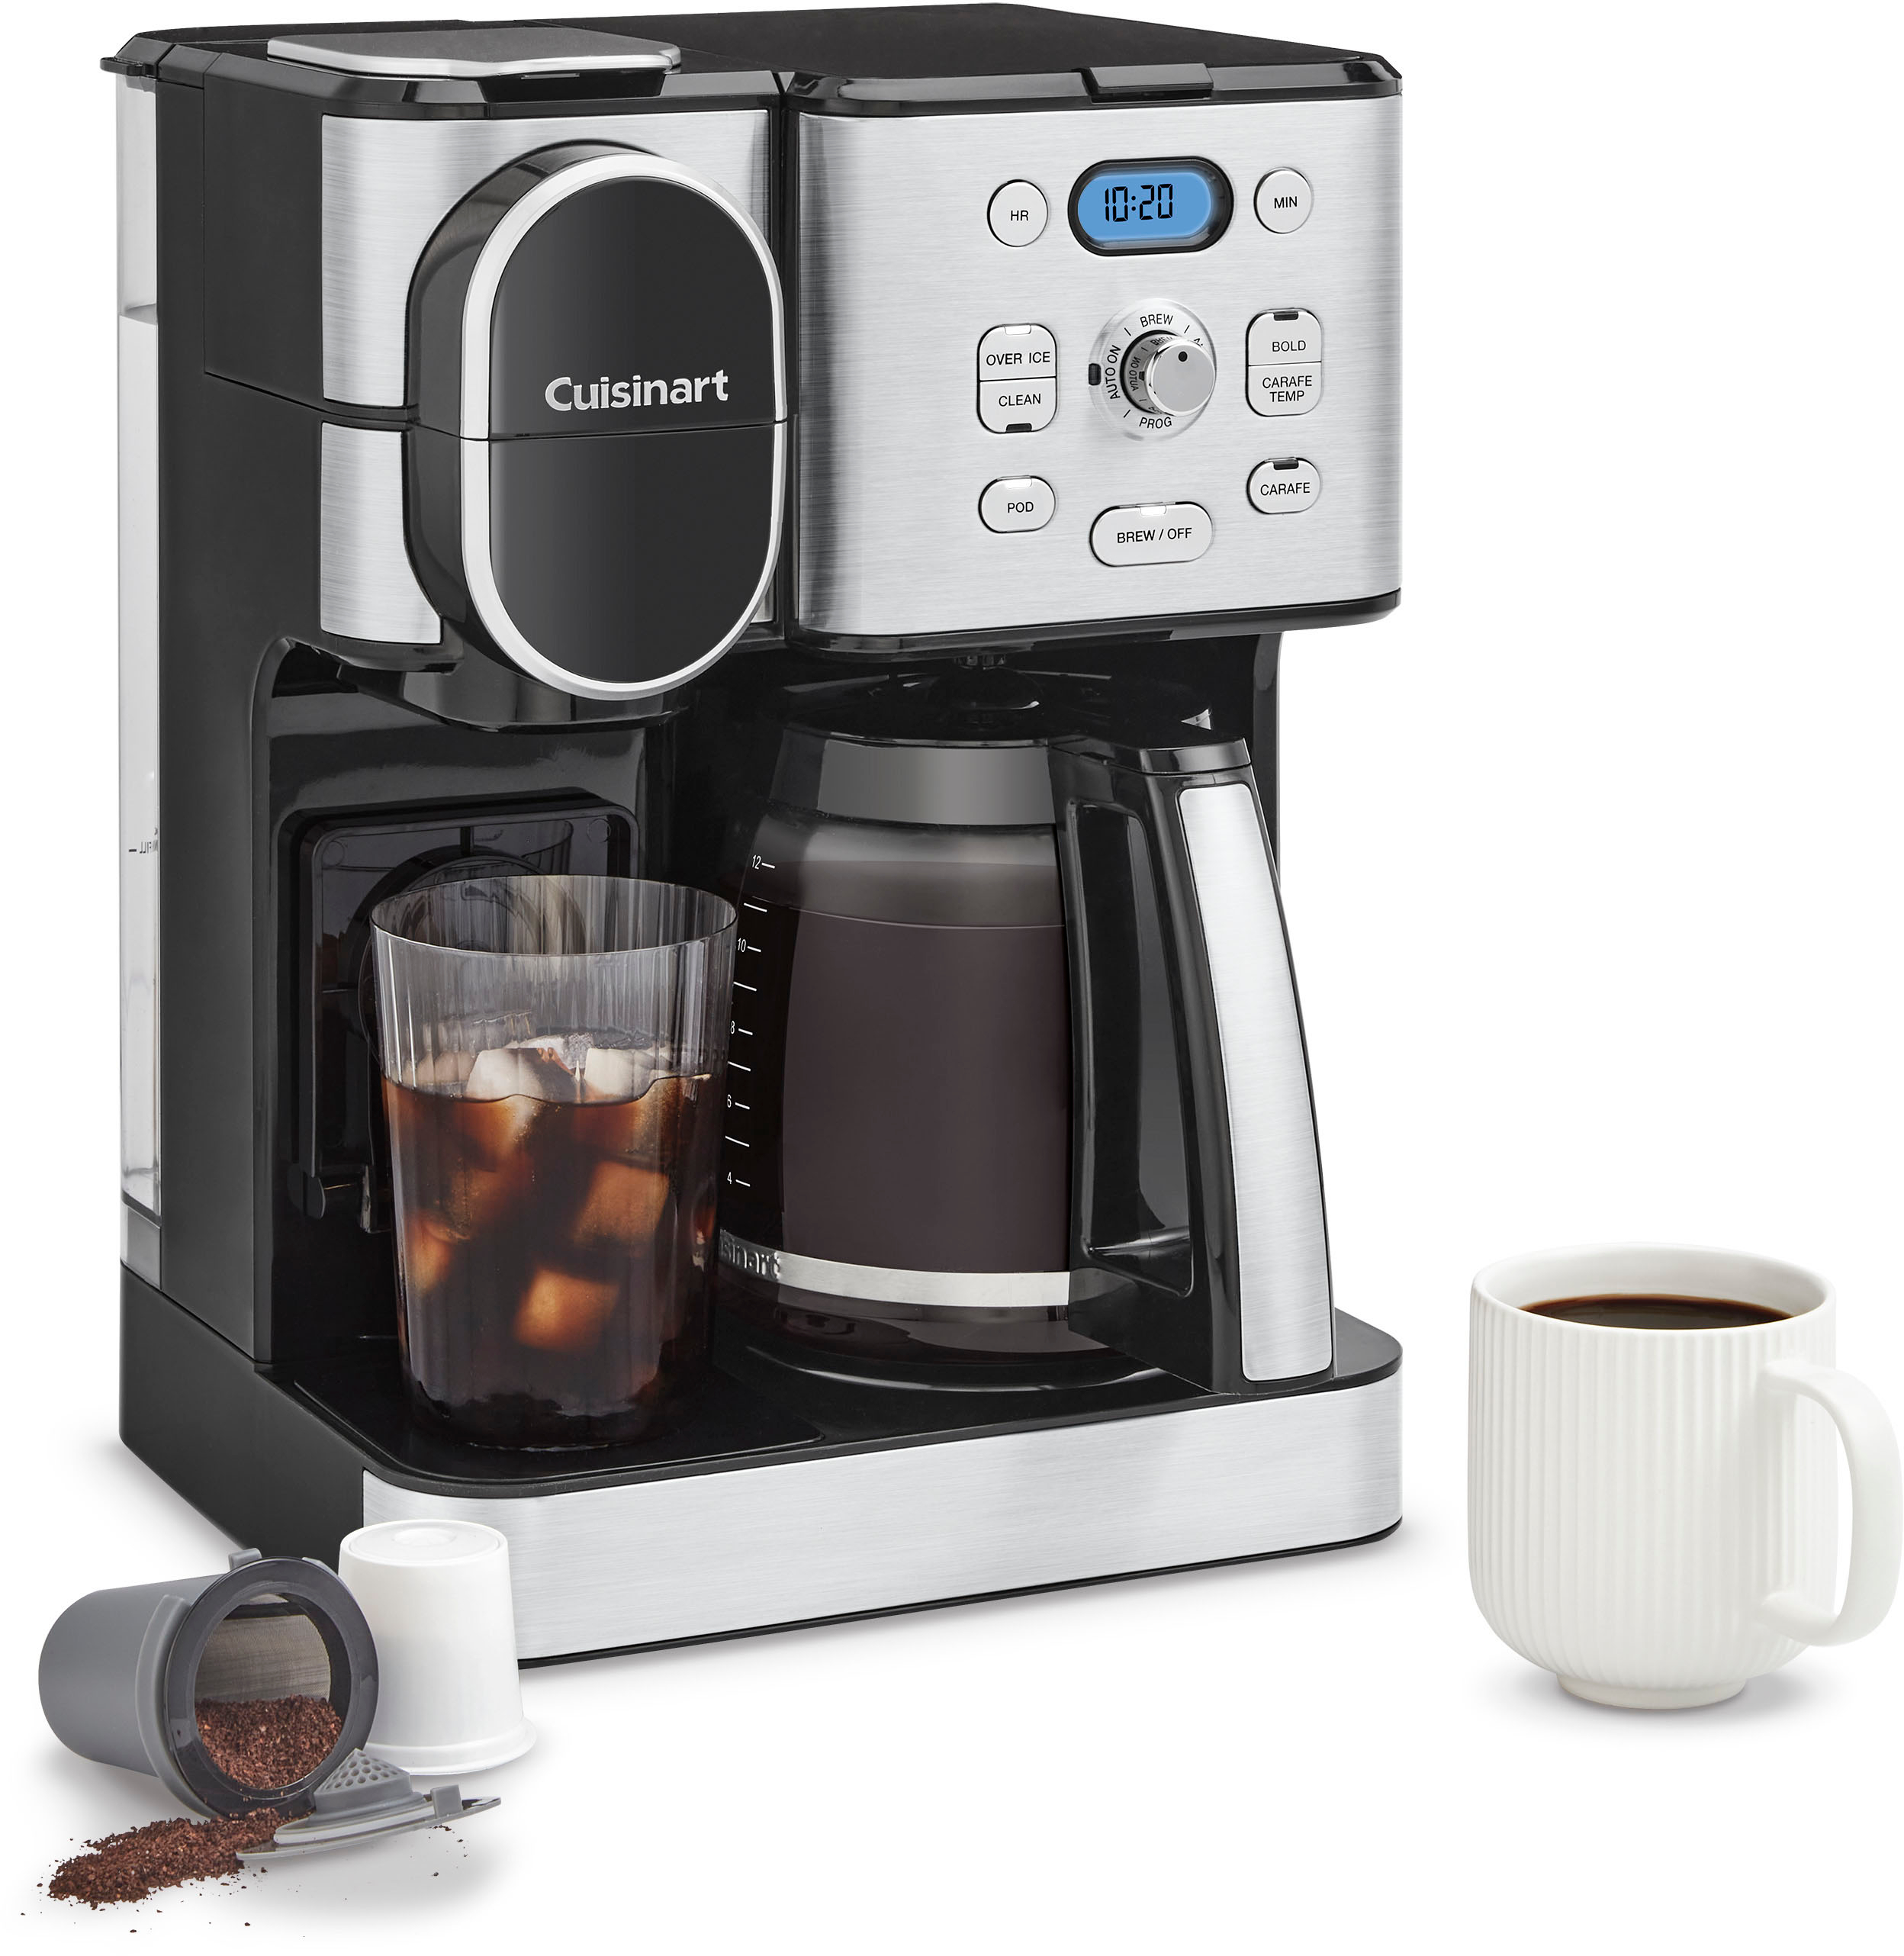 

Cuisinart - 12 Cup 2-In-1 Coffee Center Coffeemaker - Black Stainless